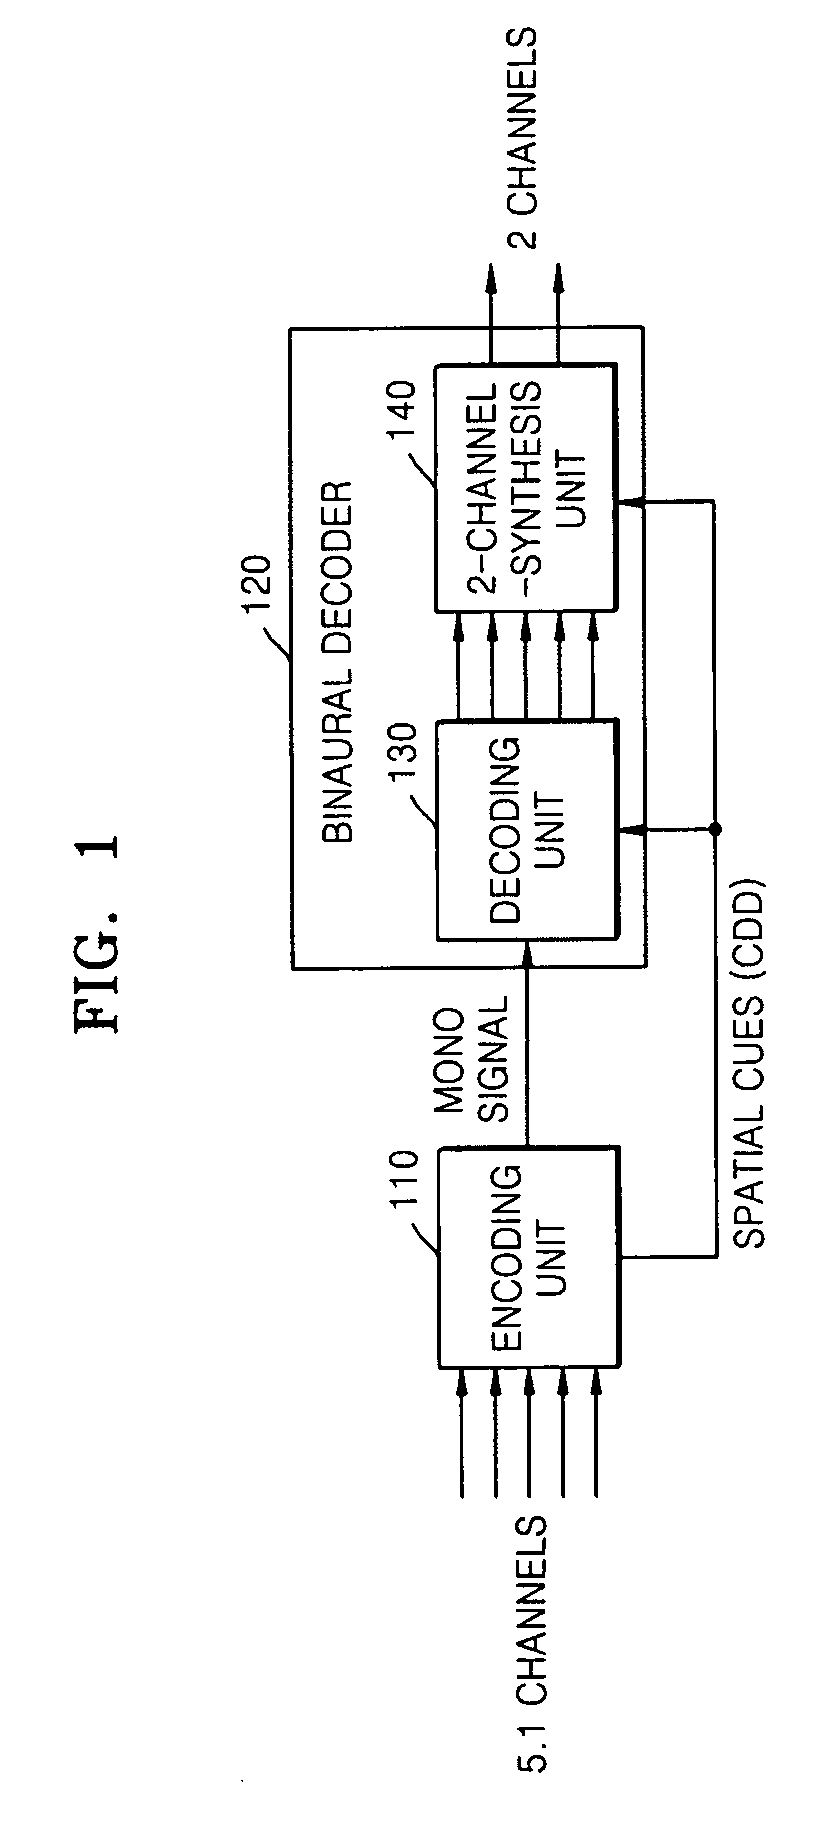 Method, medium, and system encoding/decoding a multi-channel audio signal, and method medium, and system decoding a down-mixed signal to a 2-channel signal